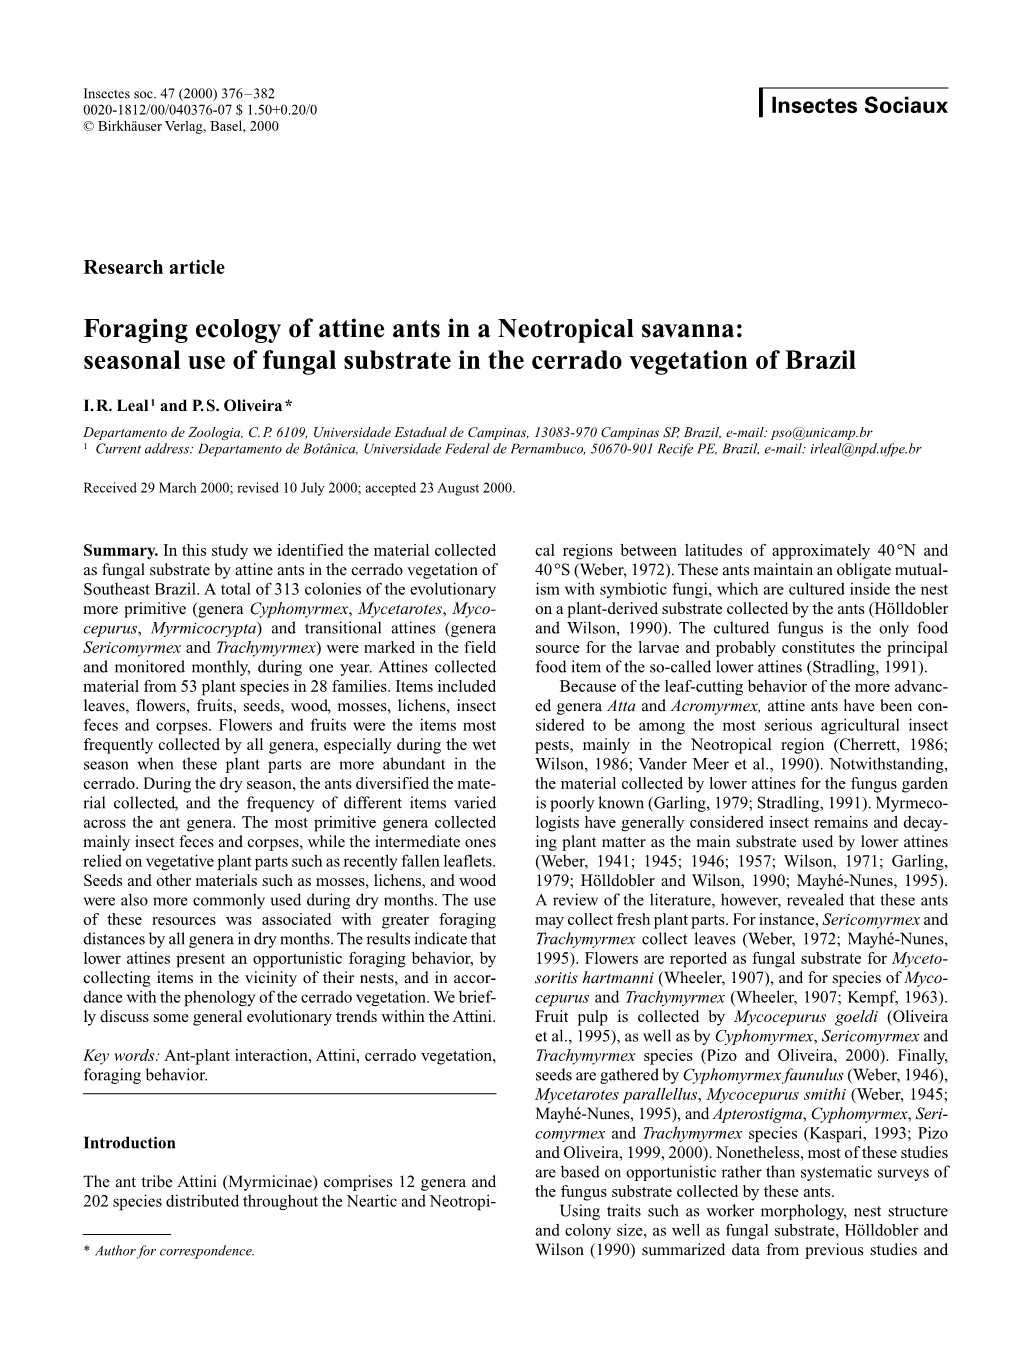 Foraging Ecology of Attine Ants in a Neotropical Savanna: Seasonal Use of Fungal Substrate in the Cerrado Vegetation of Brazil